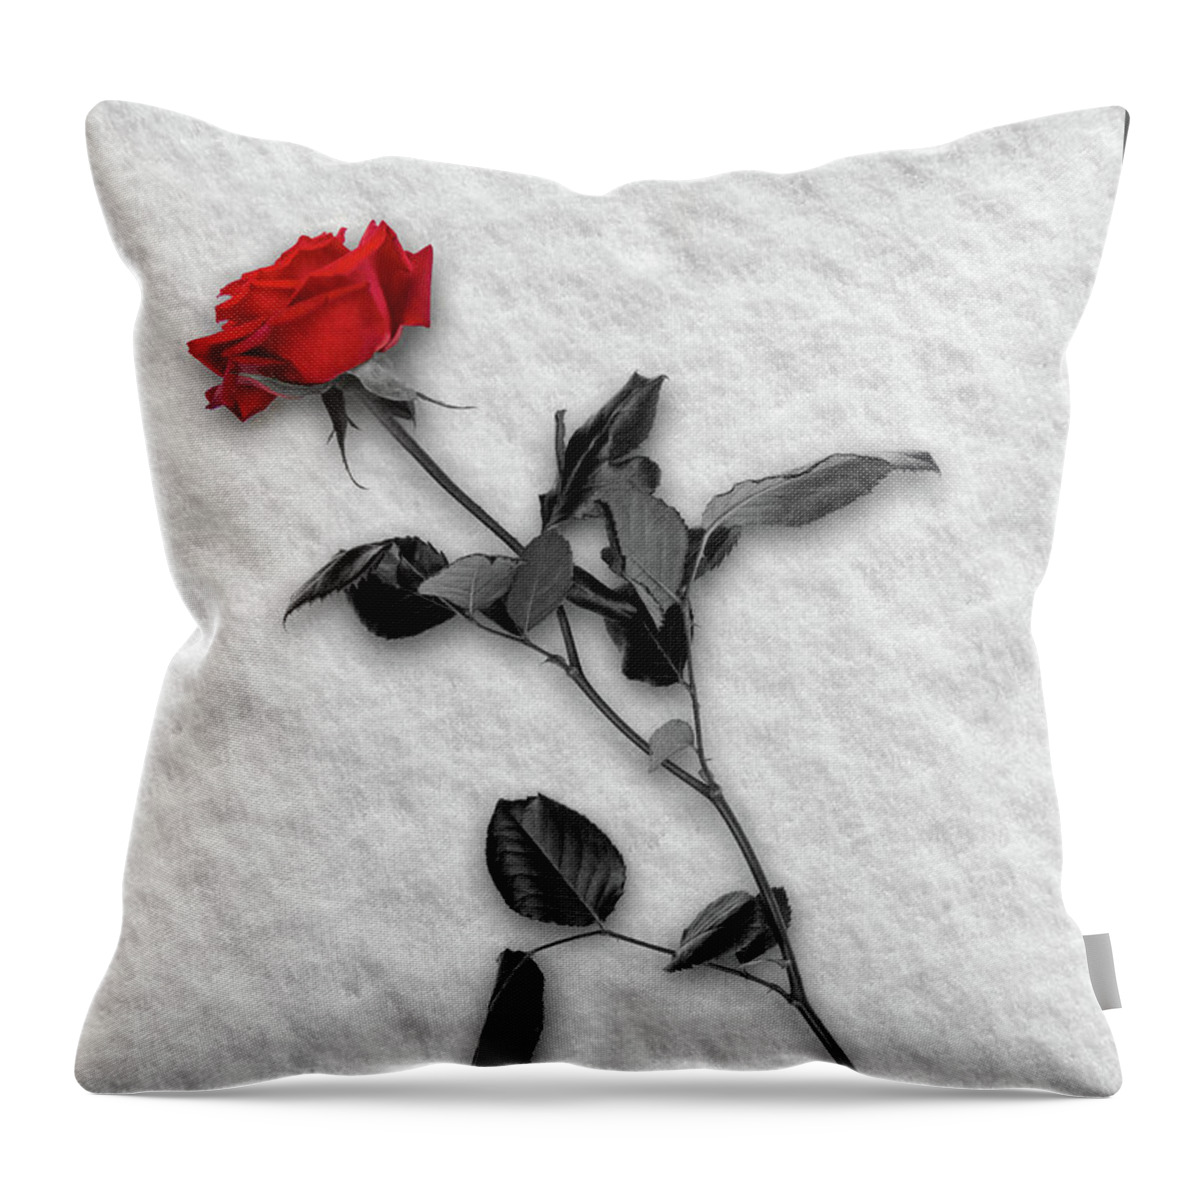 Red Throw Pillow featuring the photograph Rose in Snow by Wim Lanclus